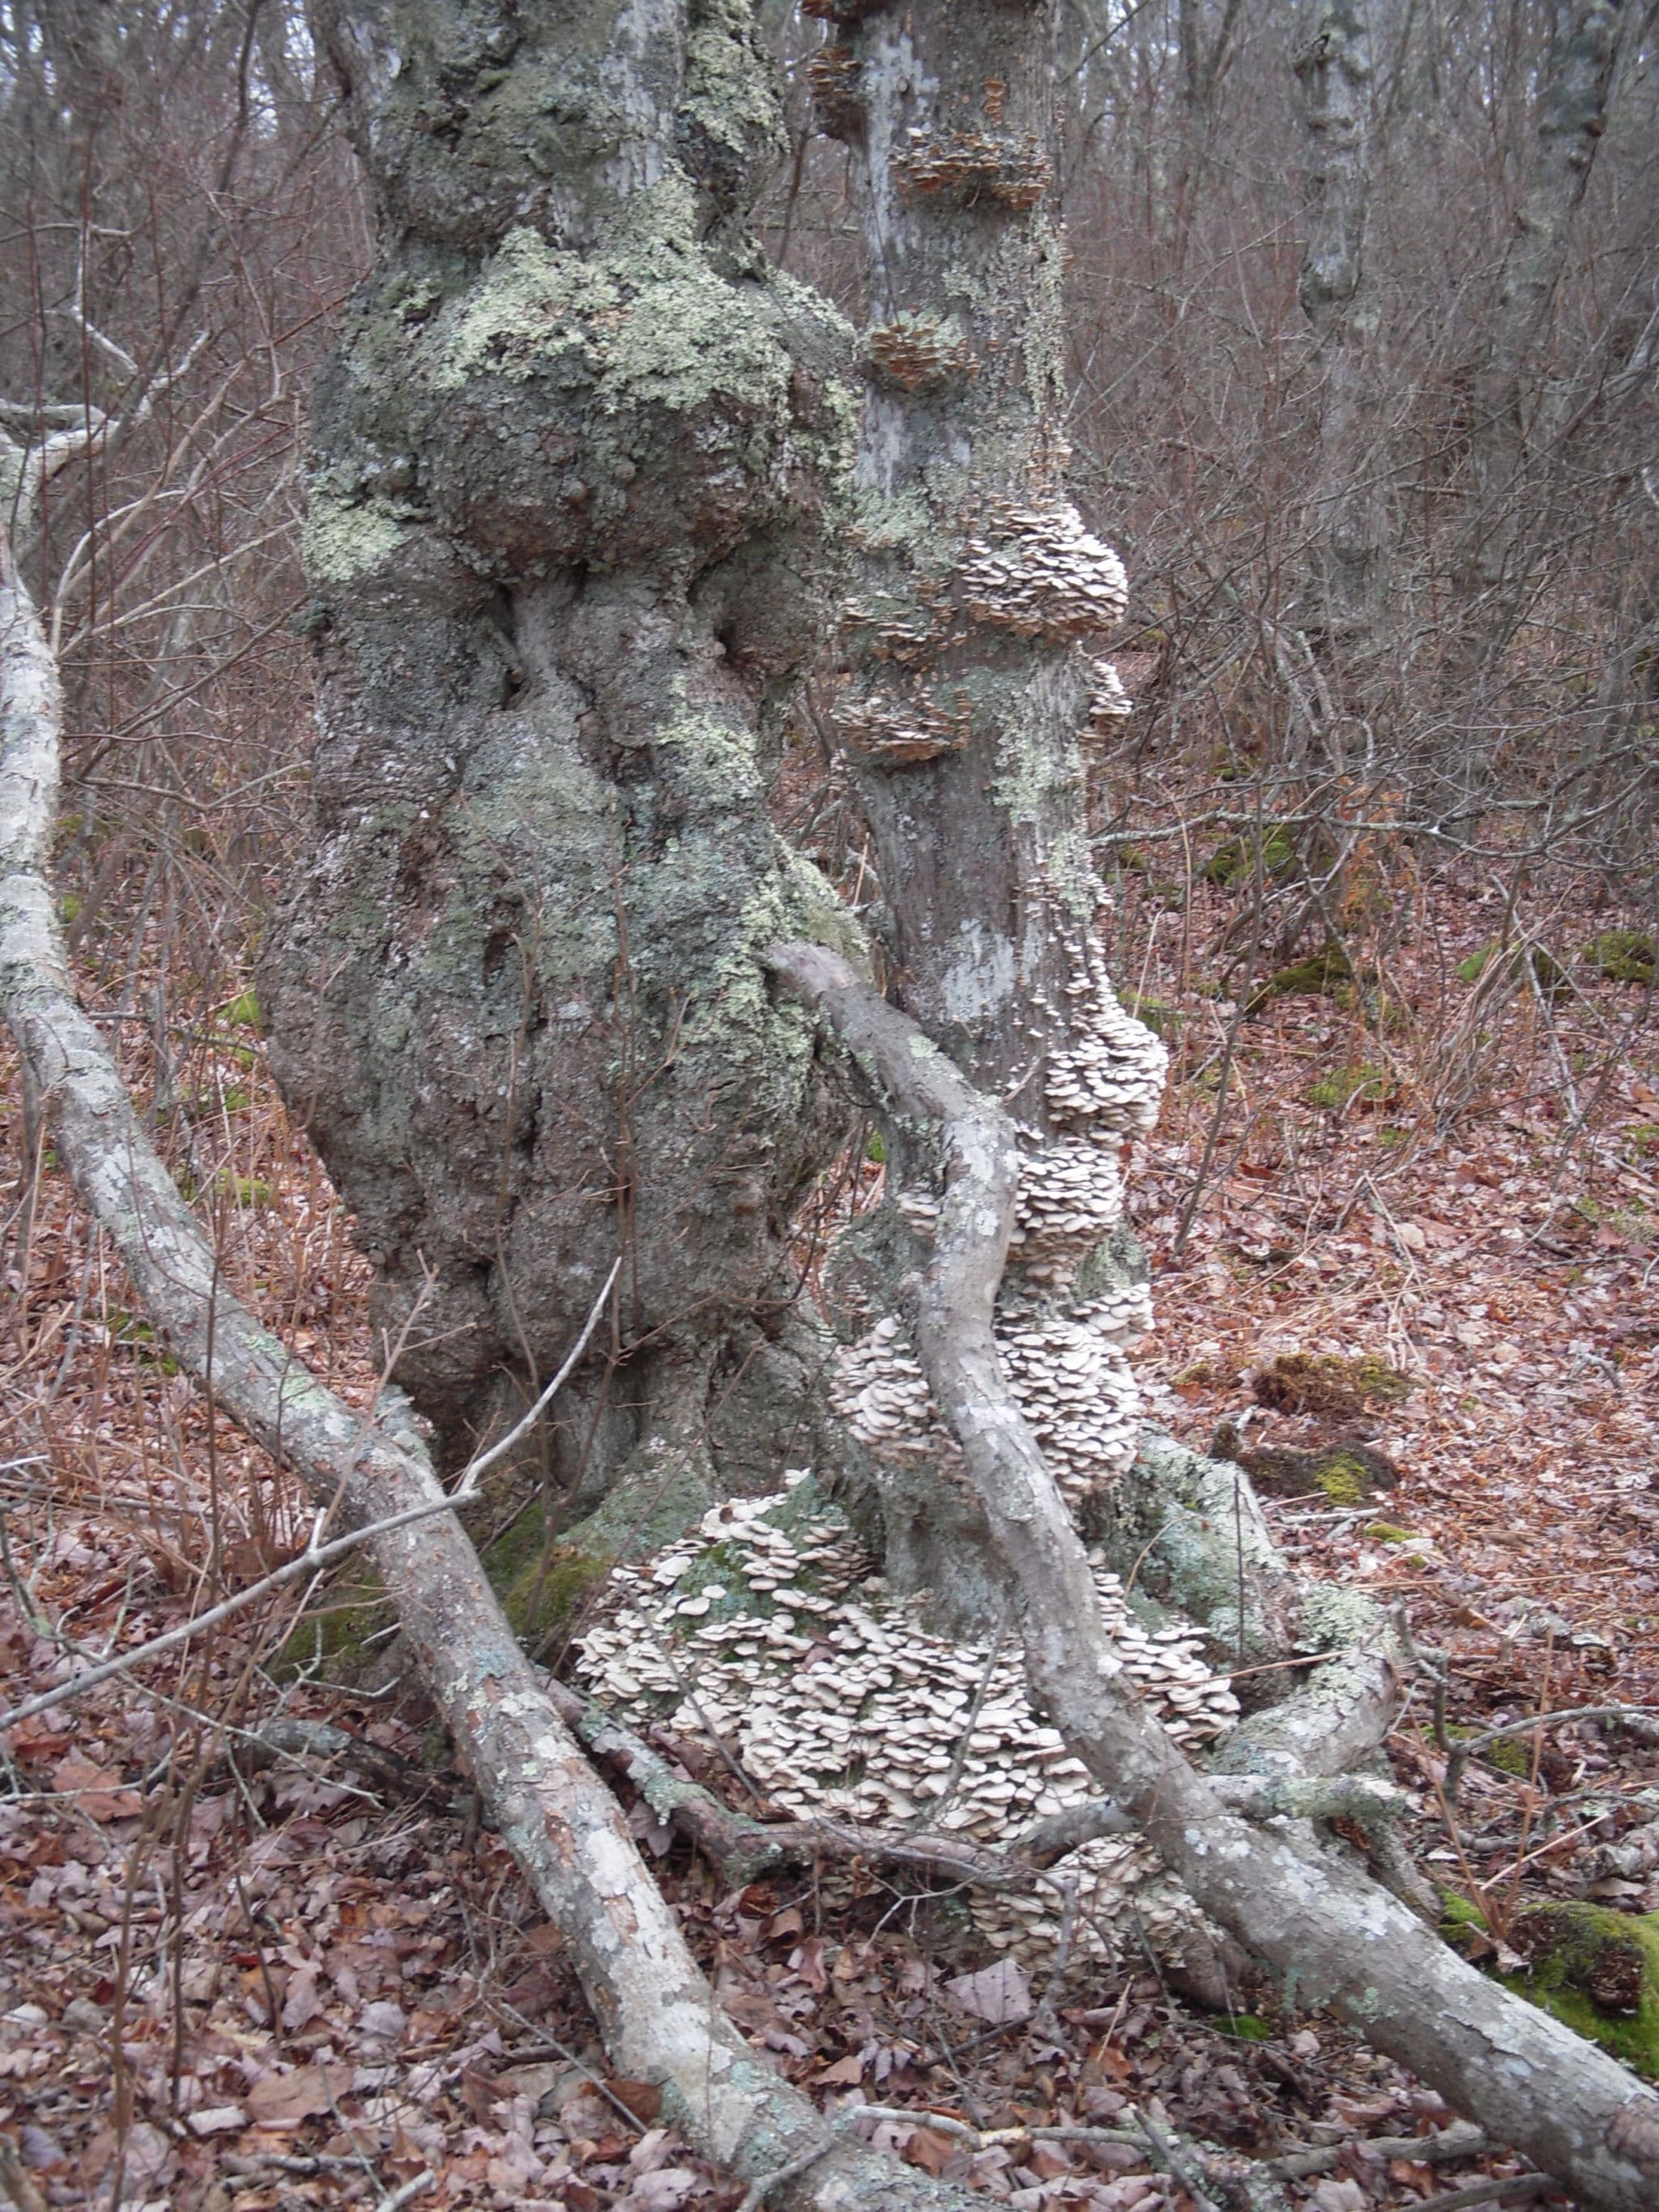 Gnarled base of Red Maple, commonly found in the wettest parts of the forest.